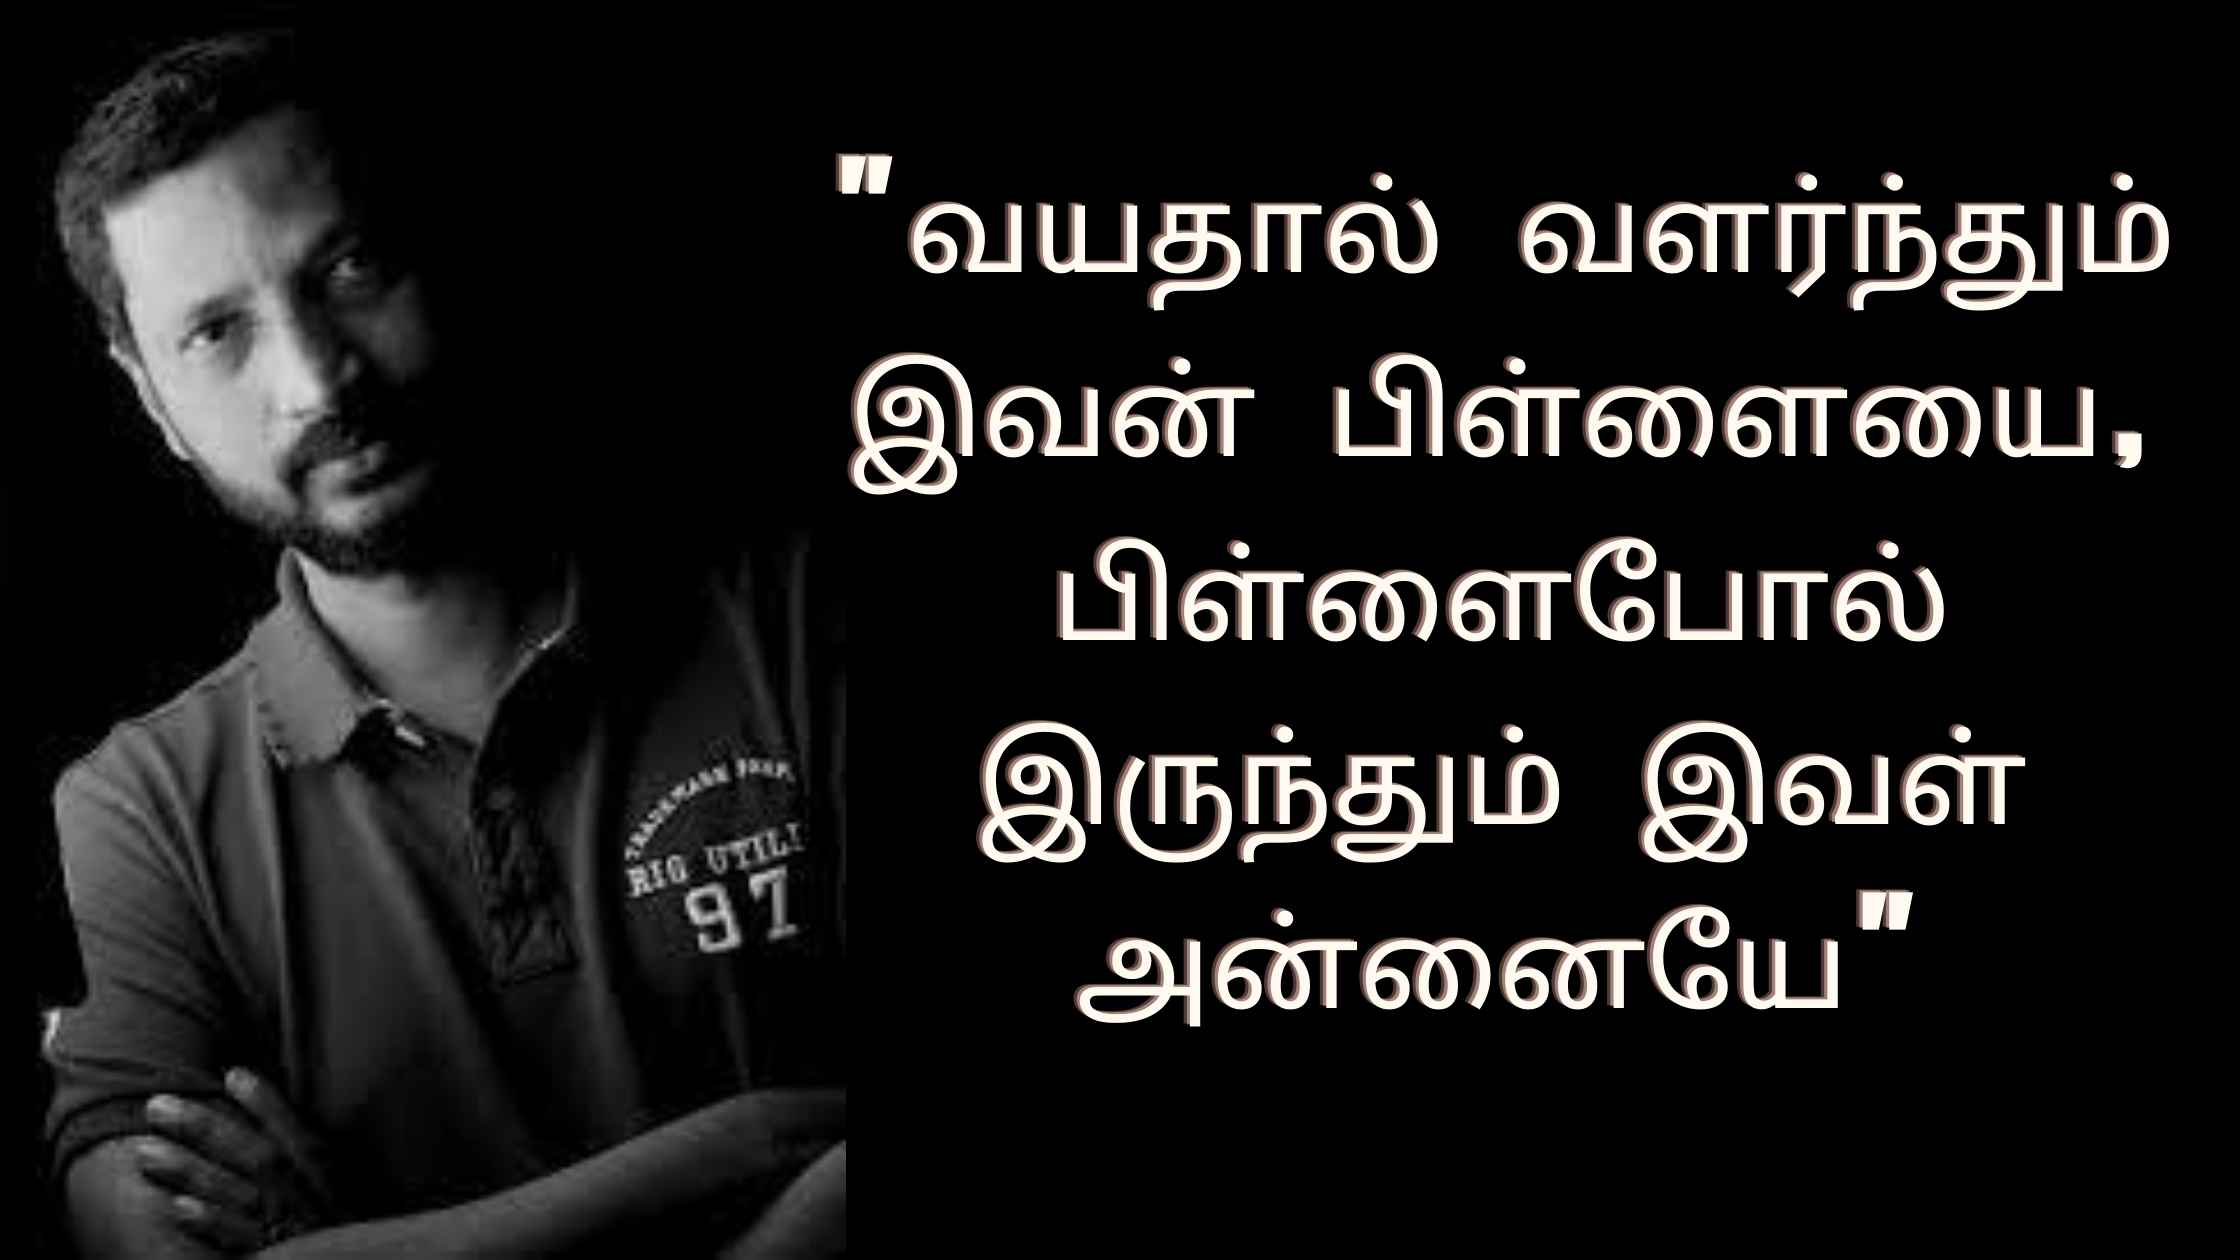 Na.Muthukumar quotes In Tamil 